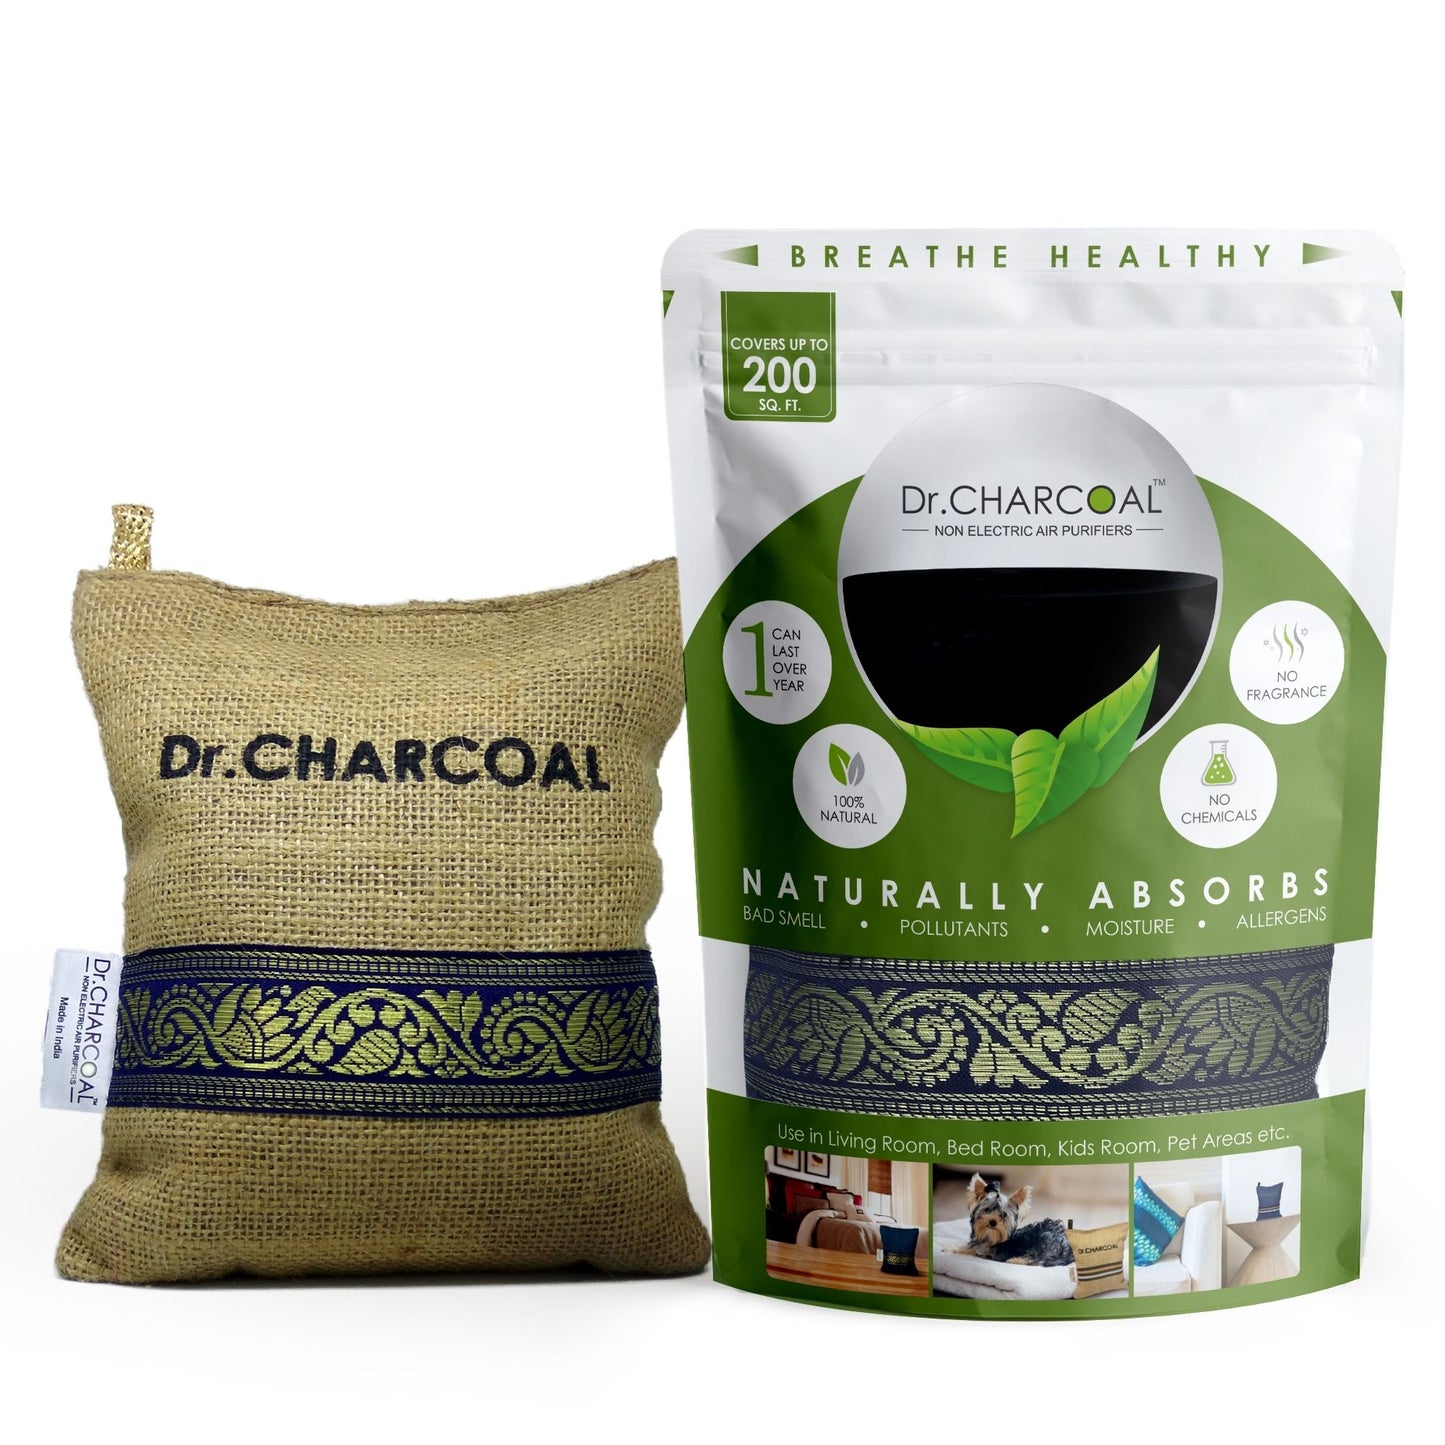 Dr. CHARCOAL Air Purifier Bags to Deodorize and Dehumidify  Living Room, Bedroom, Pet Areas (500g)